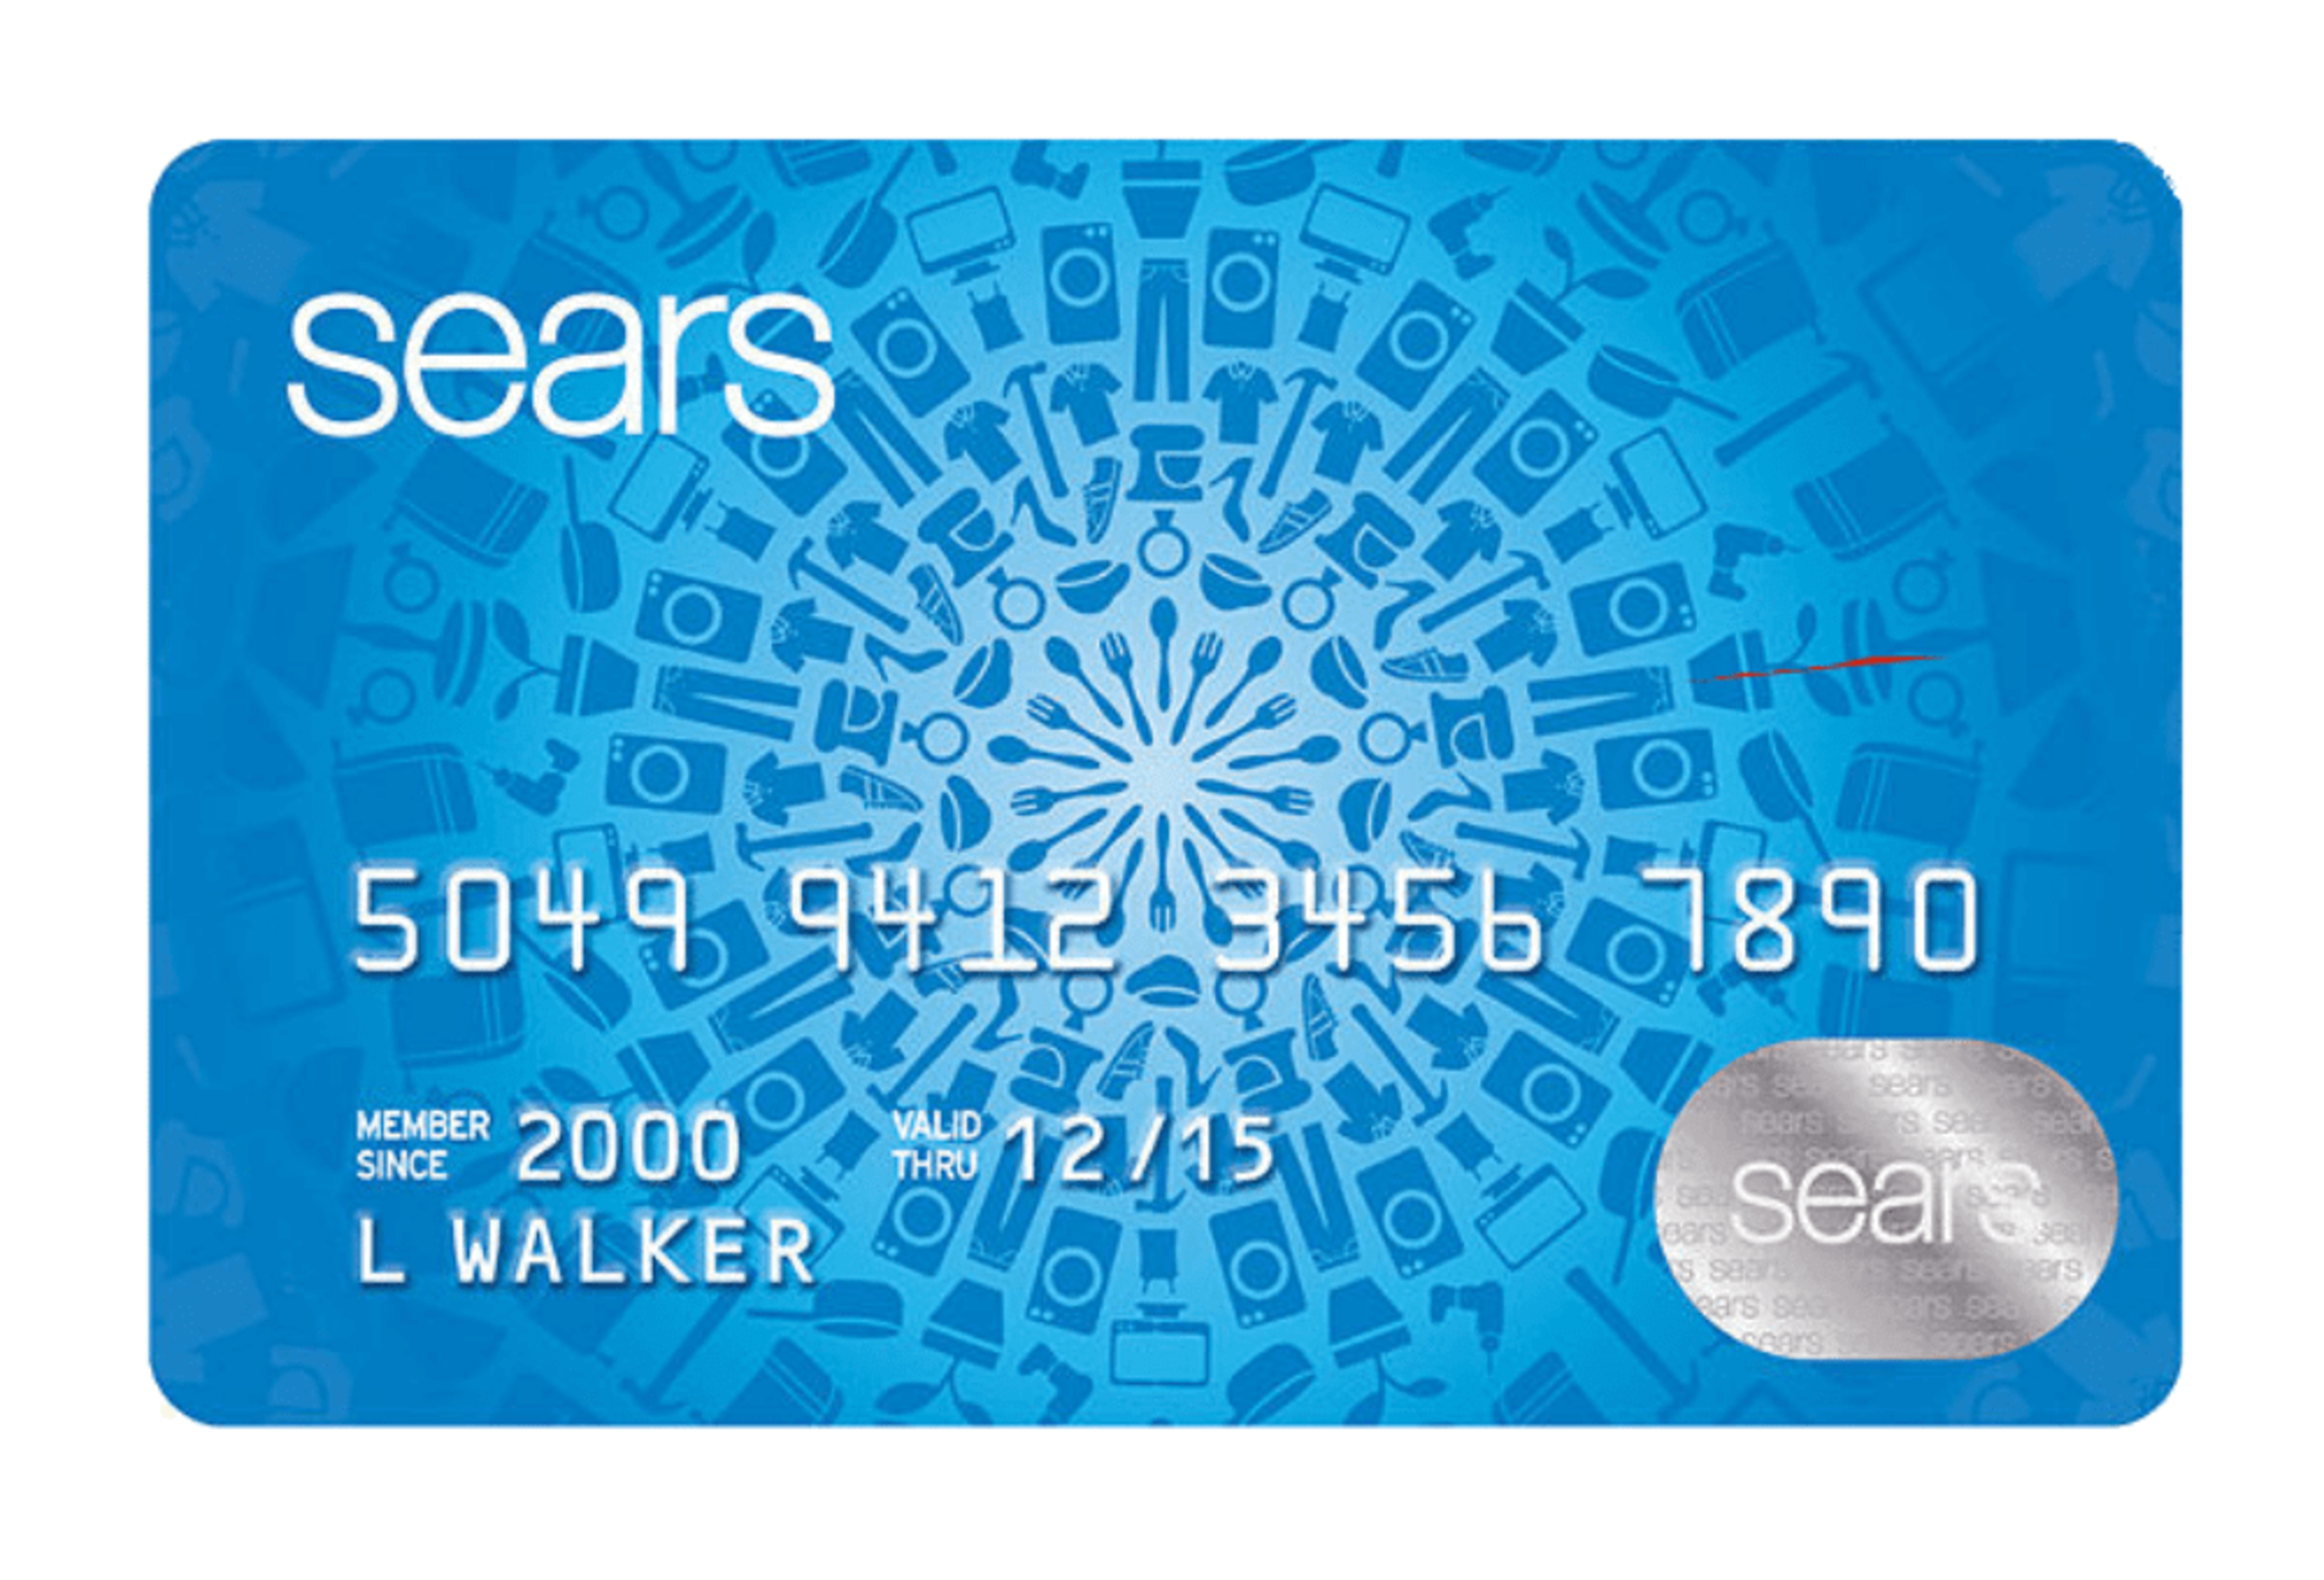 Sears Credit Card Managed by Tally.